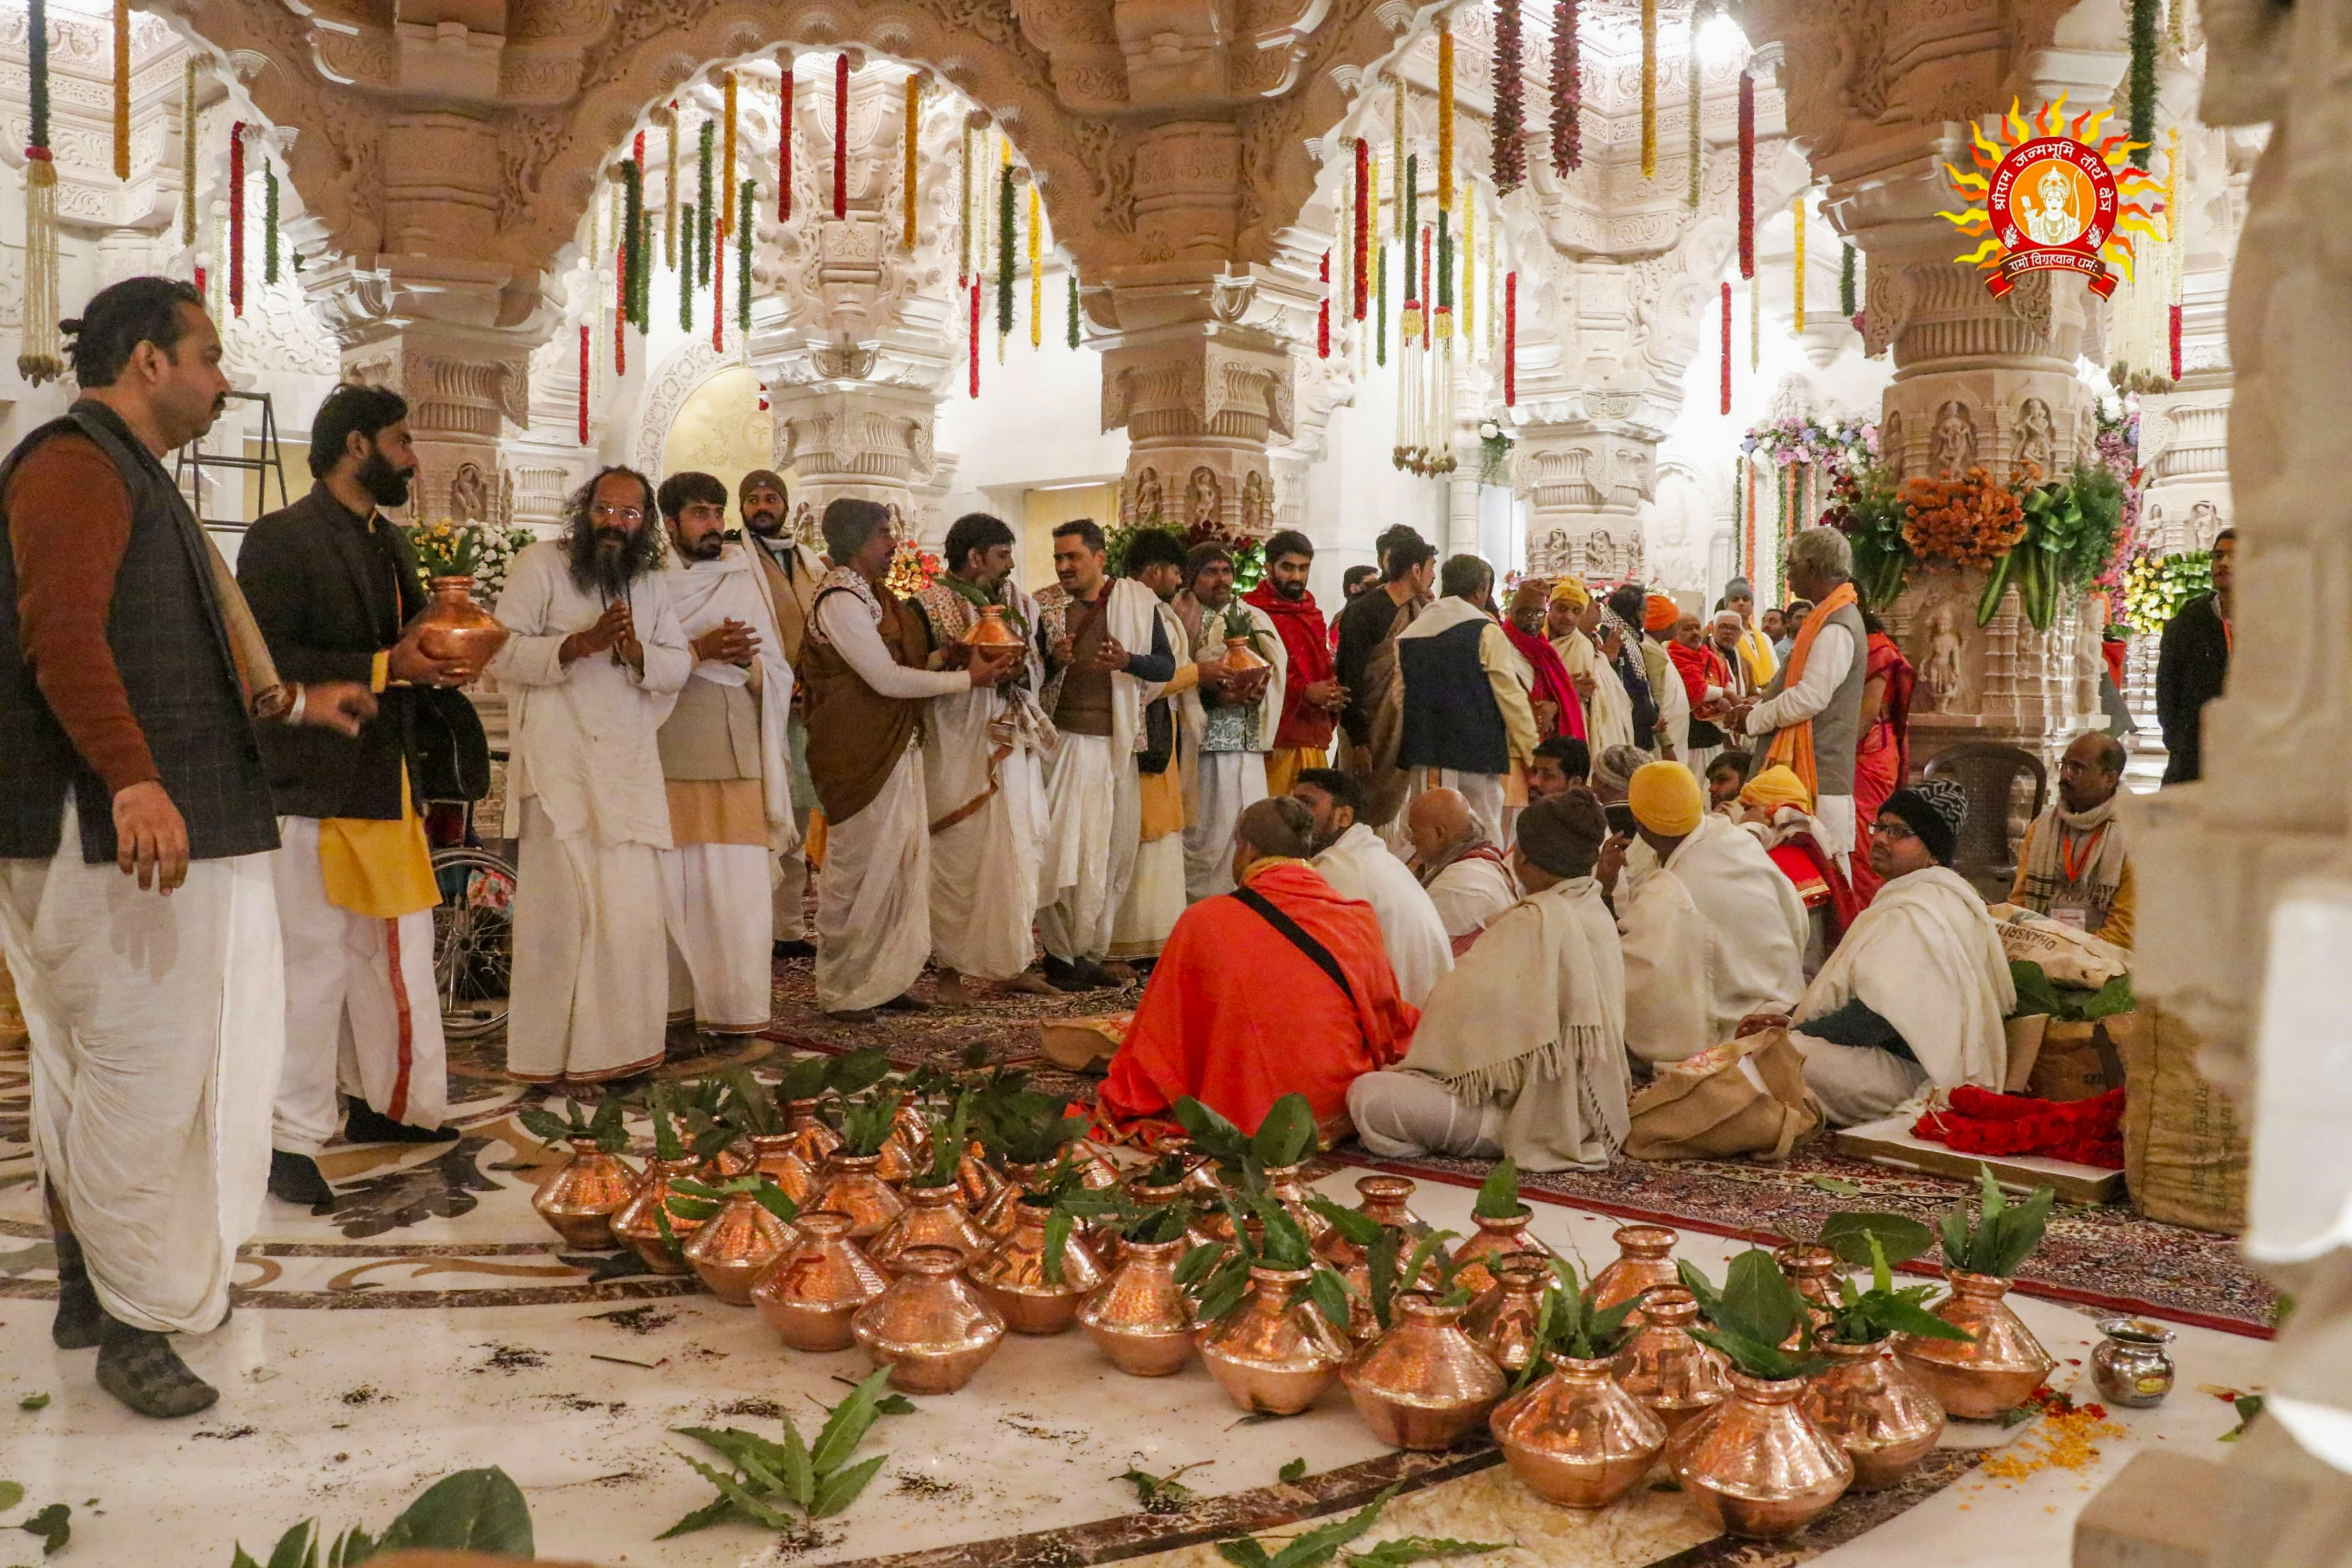 The Hindu on X: "Priests perform 'puja' rituals ahead of the consecration  ceremony of #RamMandir, in #Ayodhya. https://t.co/uu6p90Vq5n" / X